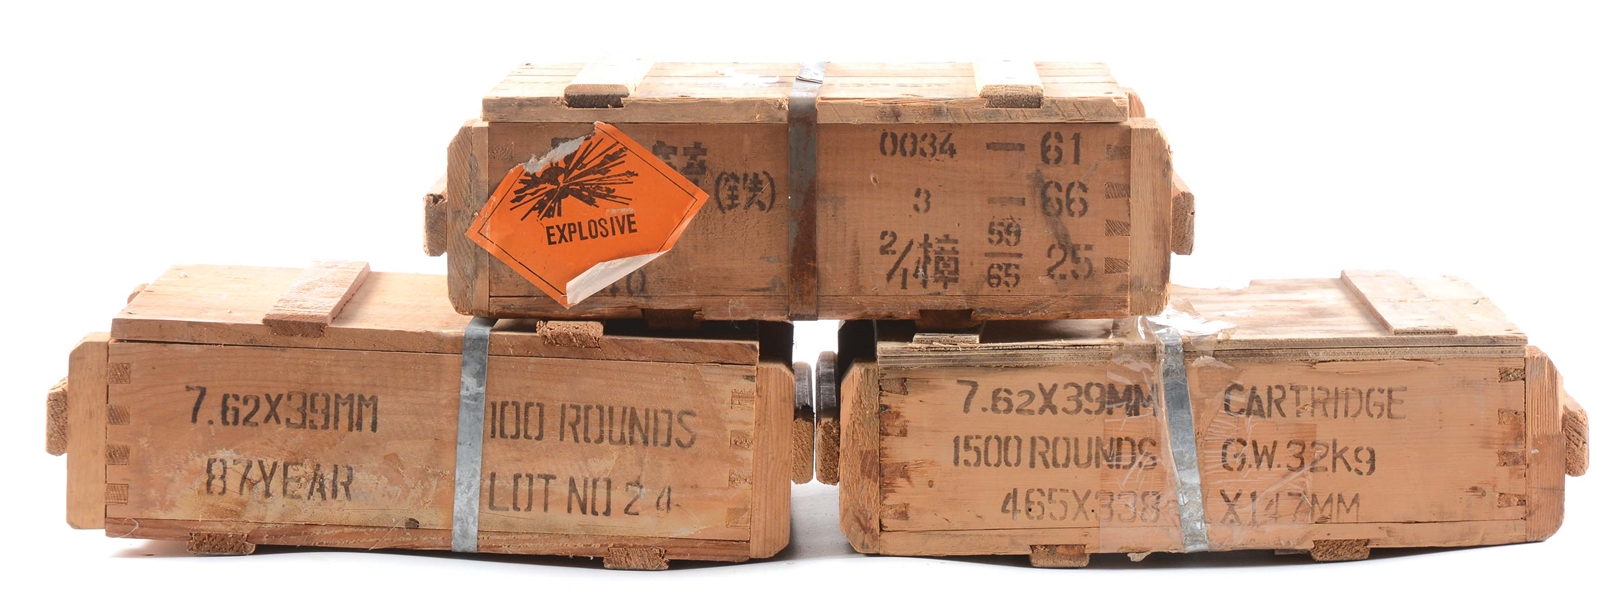 LOT OF 3: CRATES OF 1100 & 1500 ROUNDS OF CHINESE 7.62X39MM AMMO TOTALING 3700 ROUNDS OF AMMUNITION.